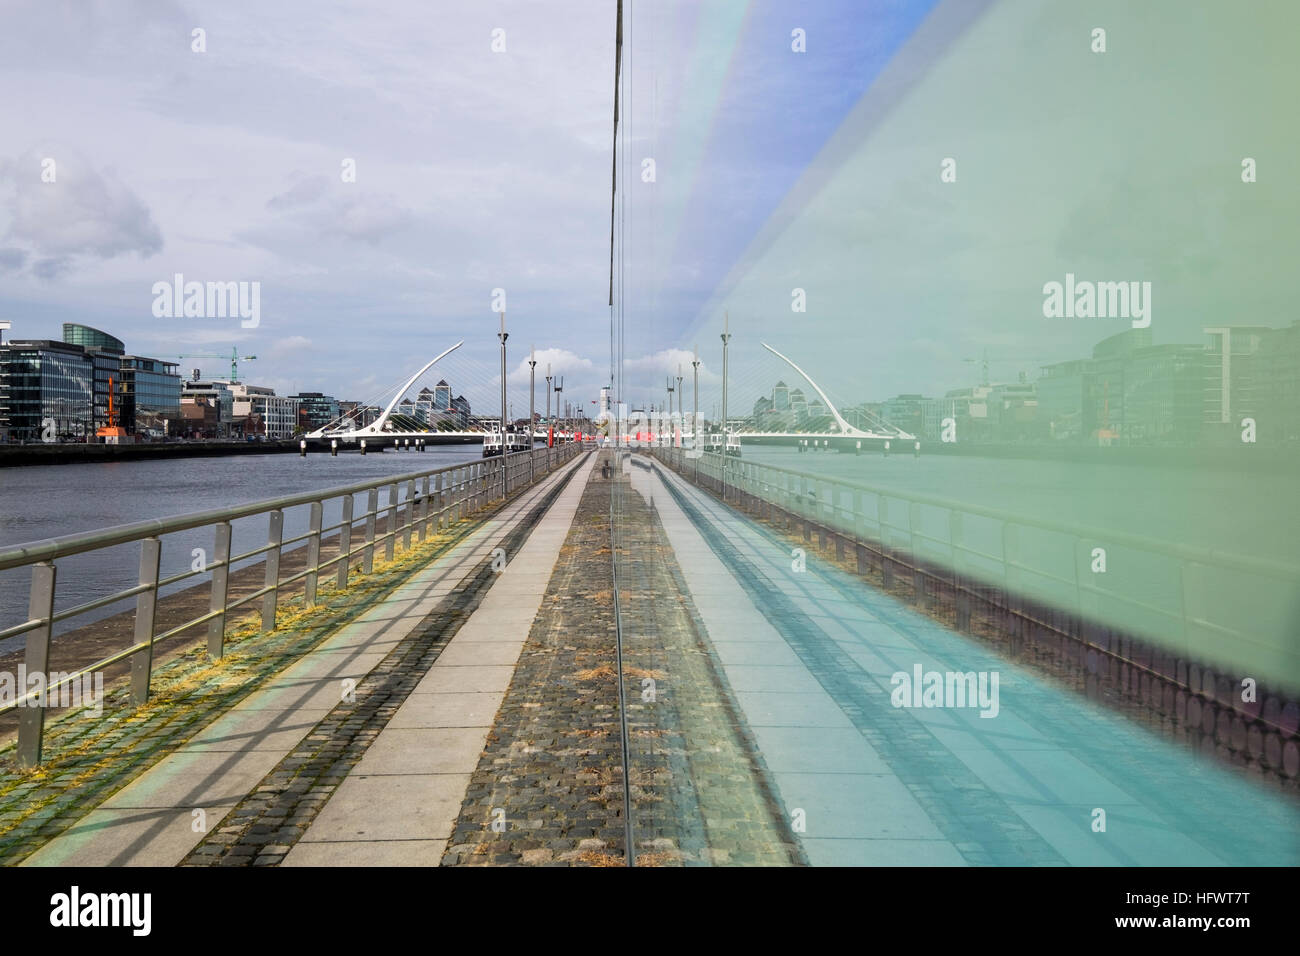 Samuel Beckett bridge over the river Liffey seen mirrored in a coloured glass wall of a building on North Wall Quay, Dublin, Ireland Stock Photo